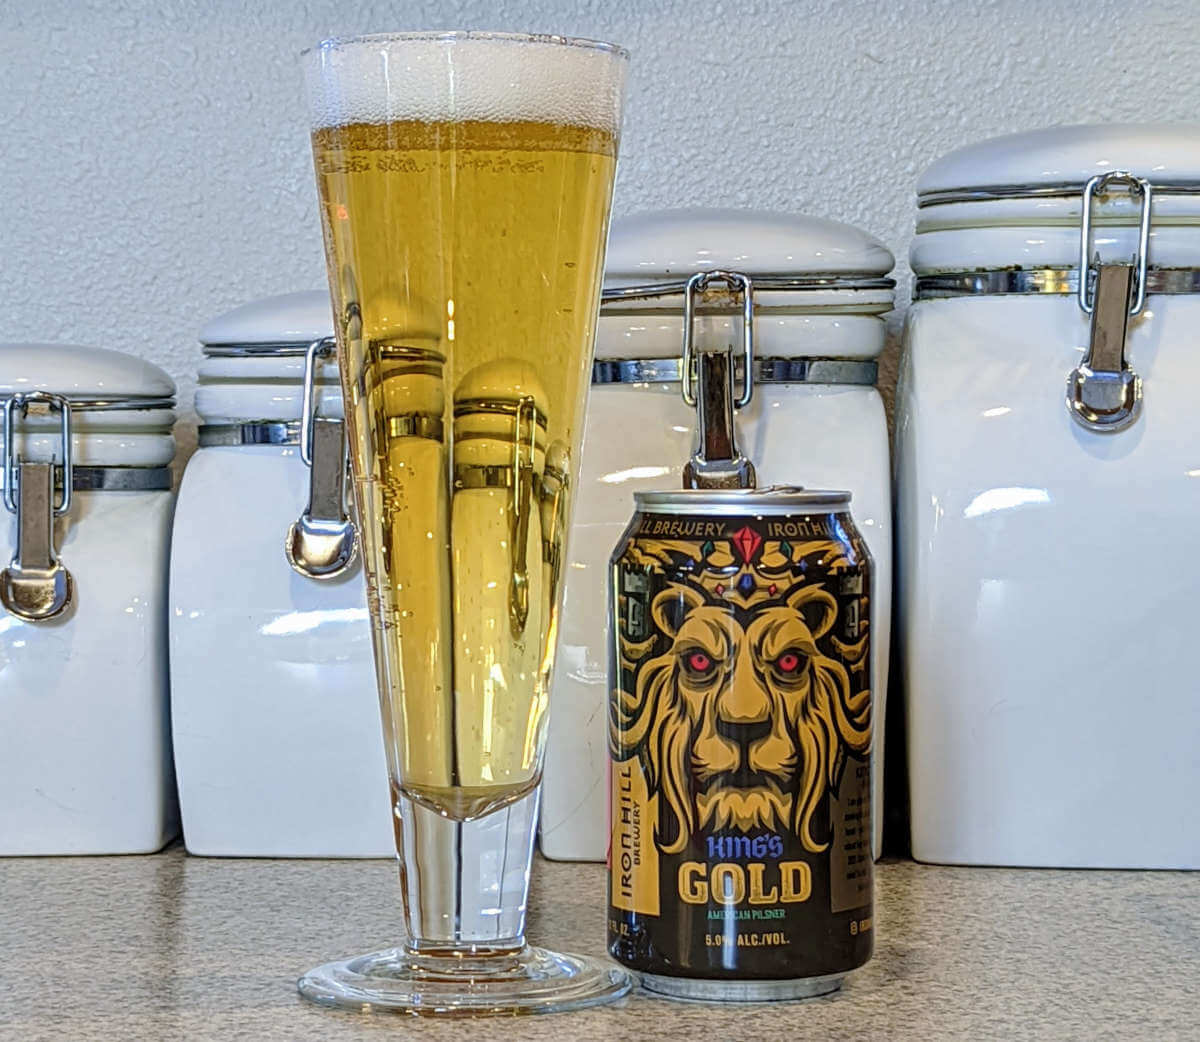 King’s Gold American Pilsner from Iron Hill Brewery